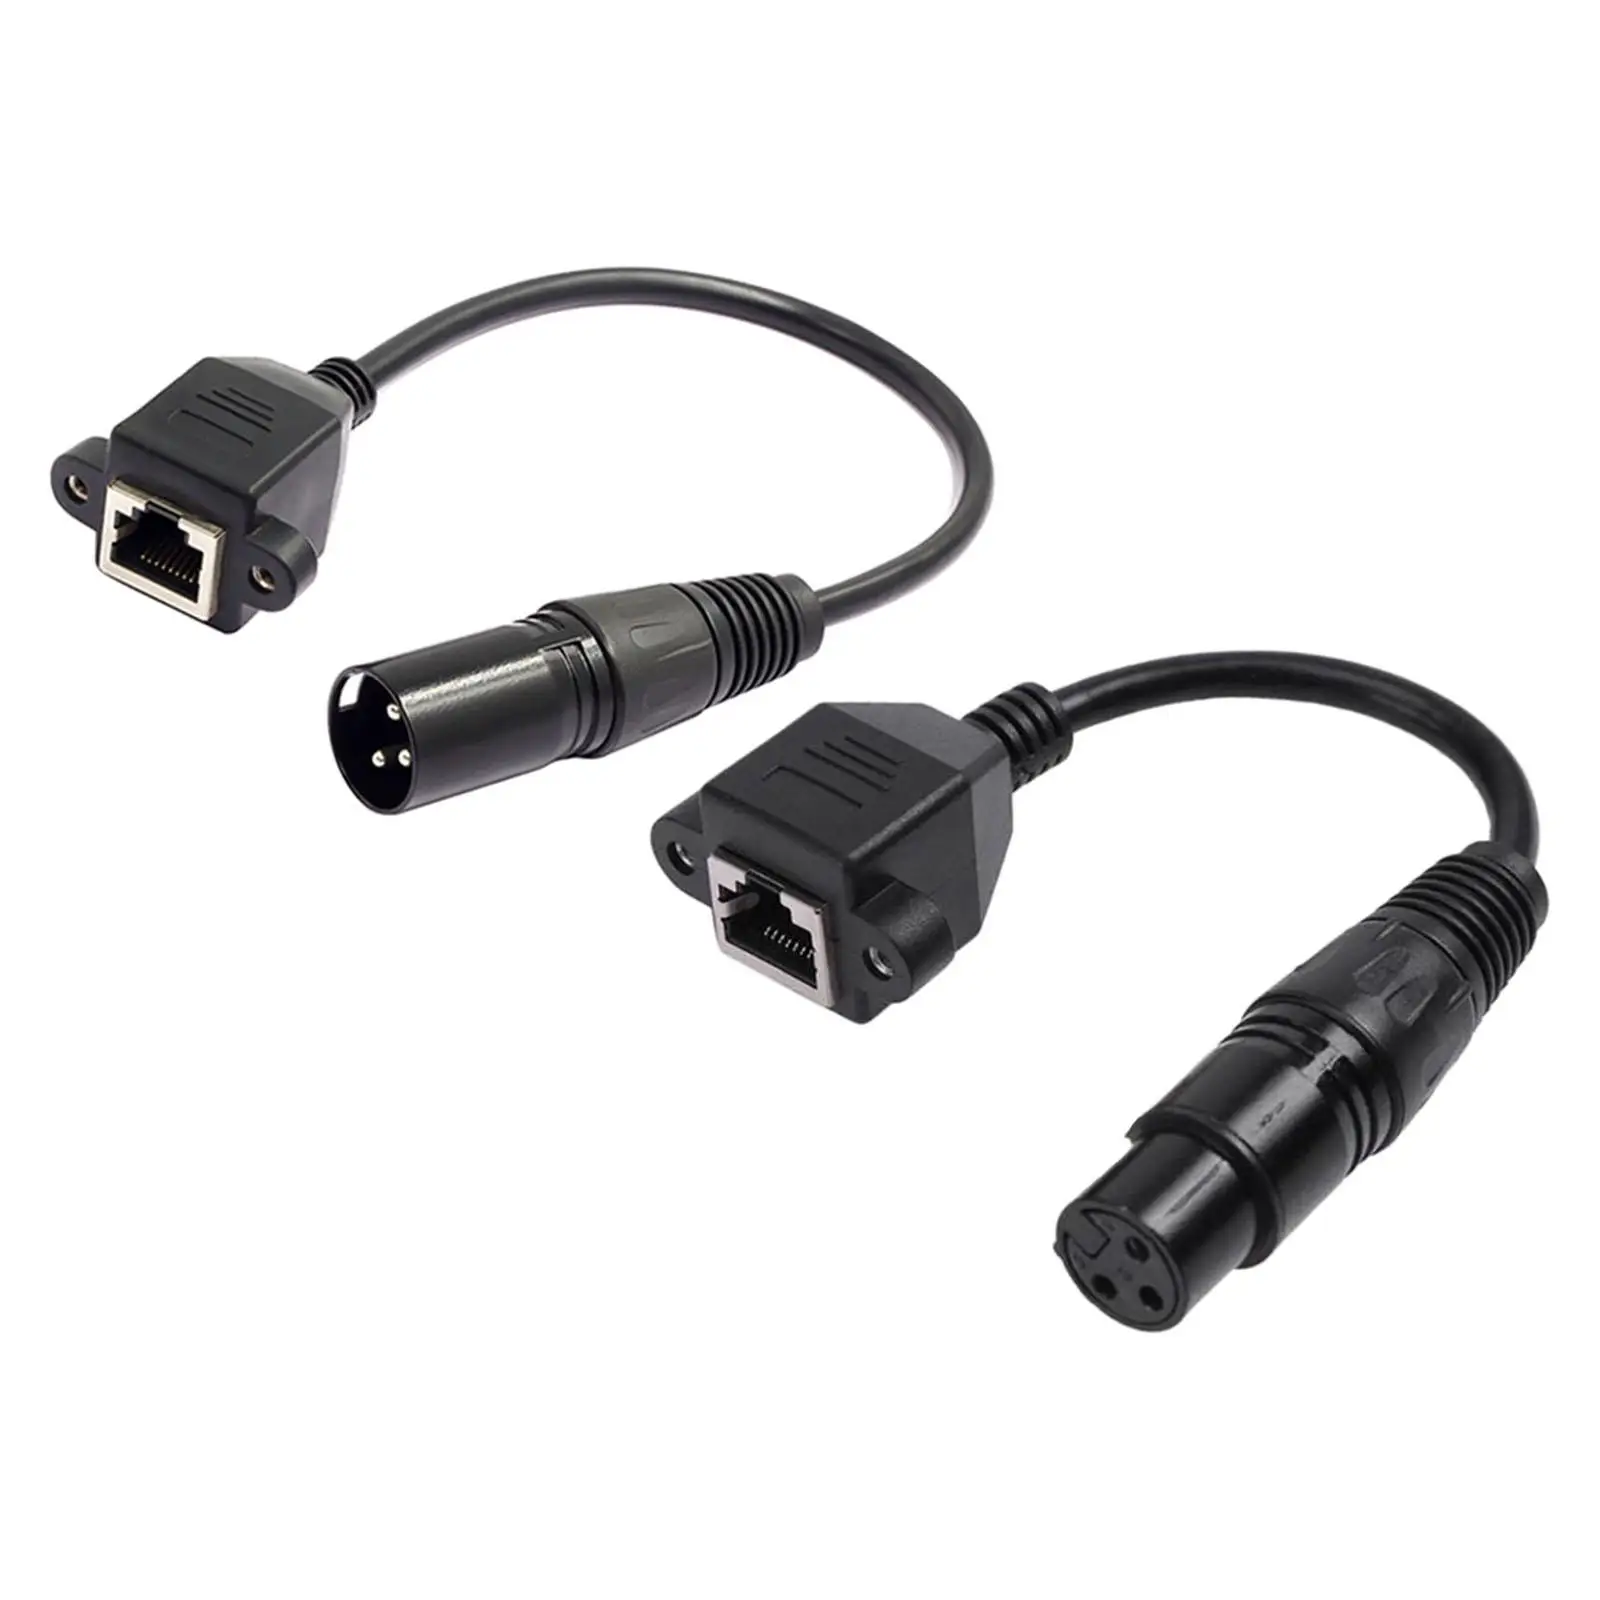 1Pair 3 Pin XLR to RJ 45 Female Male Adapter Cables, Copper Extension Cable for Dmx Con Controller Series Microphones Mixer 20cm